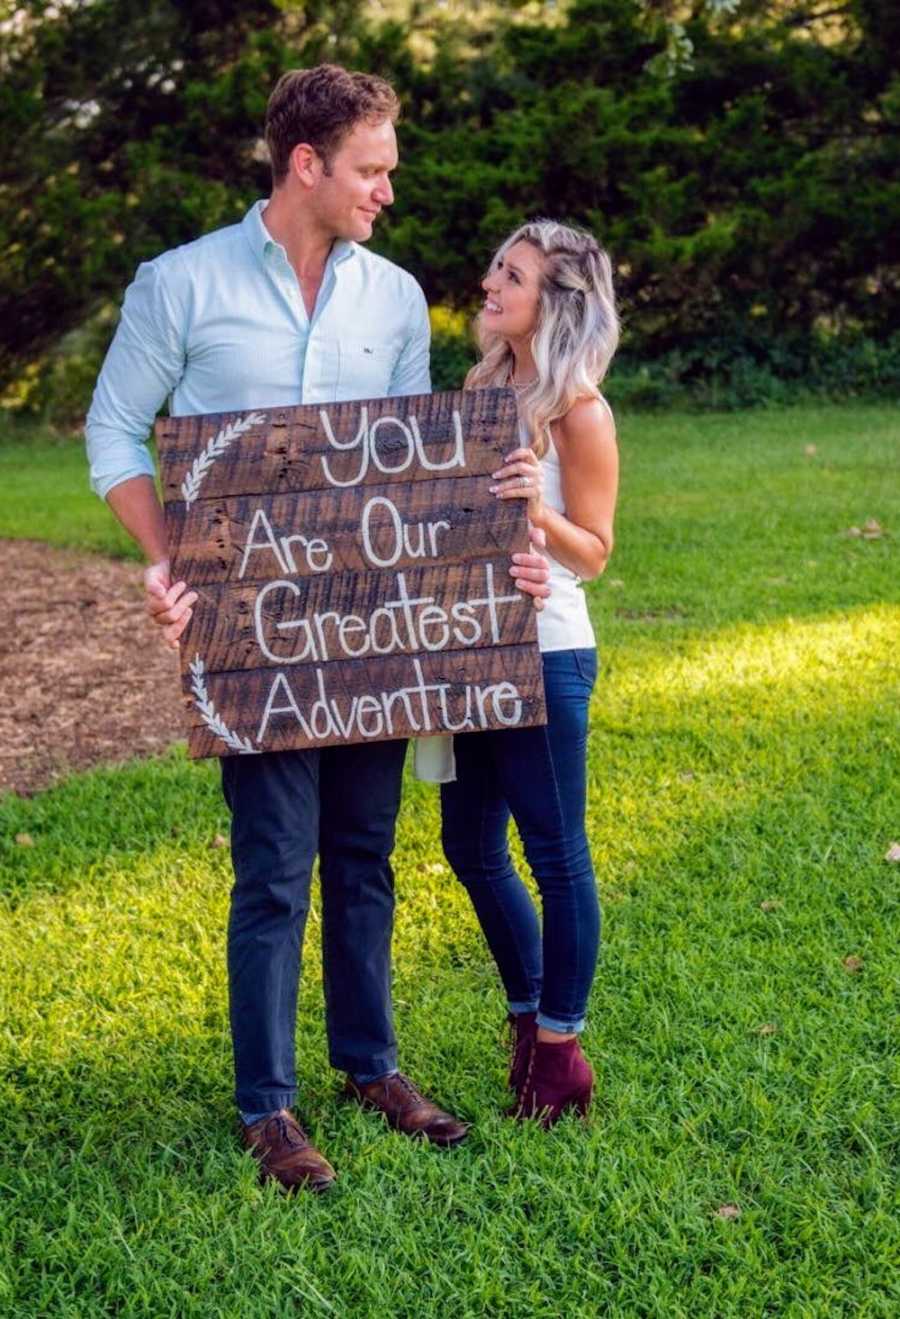 Husband and wife stand outside holding sign that says, "you are our greatest adventure"